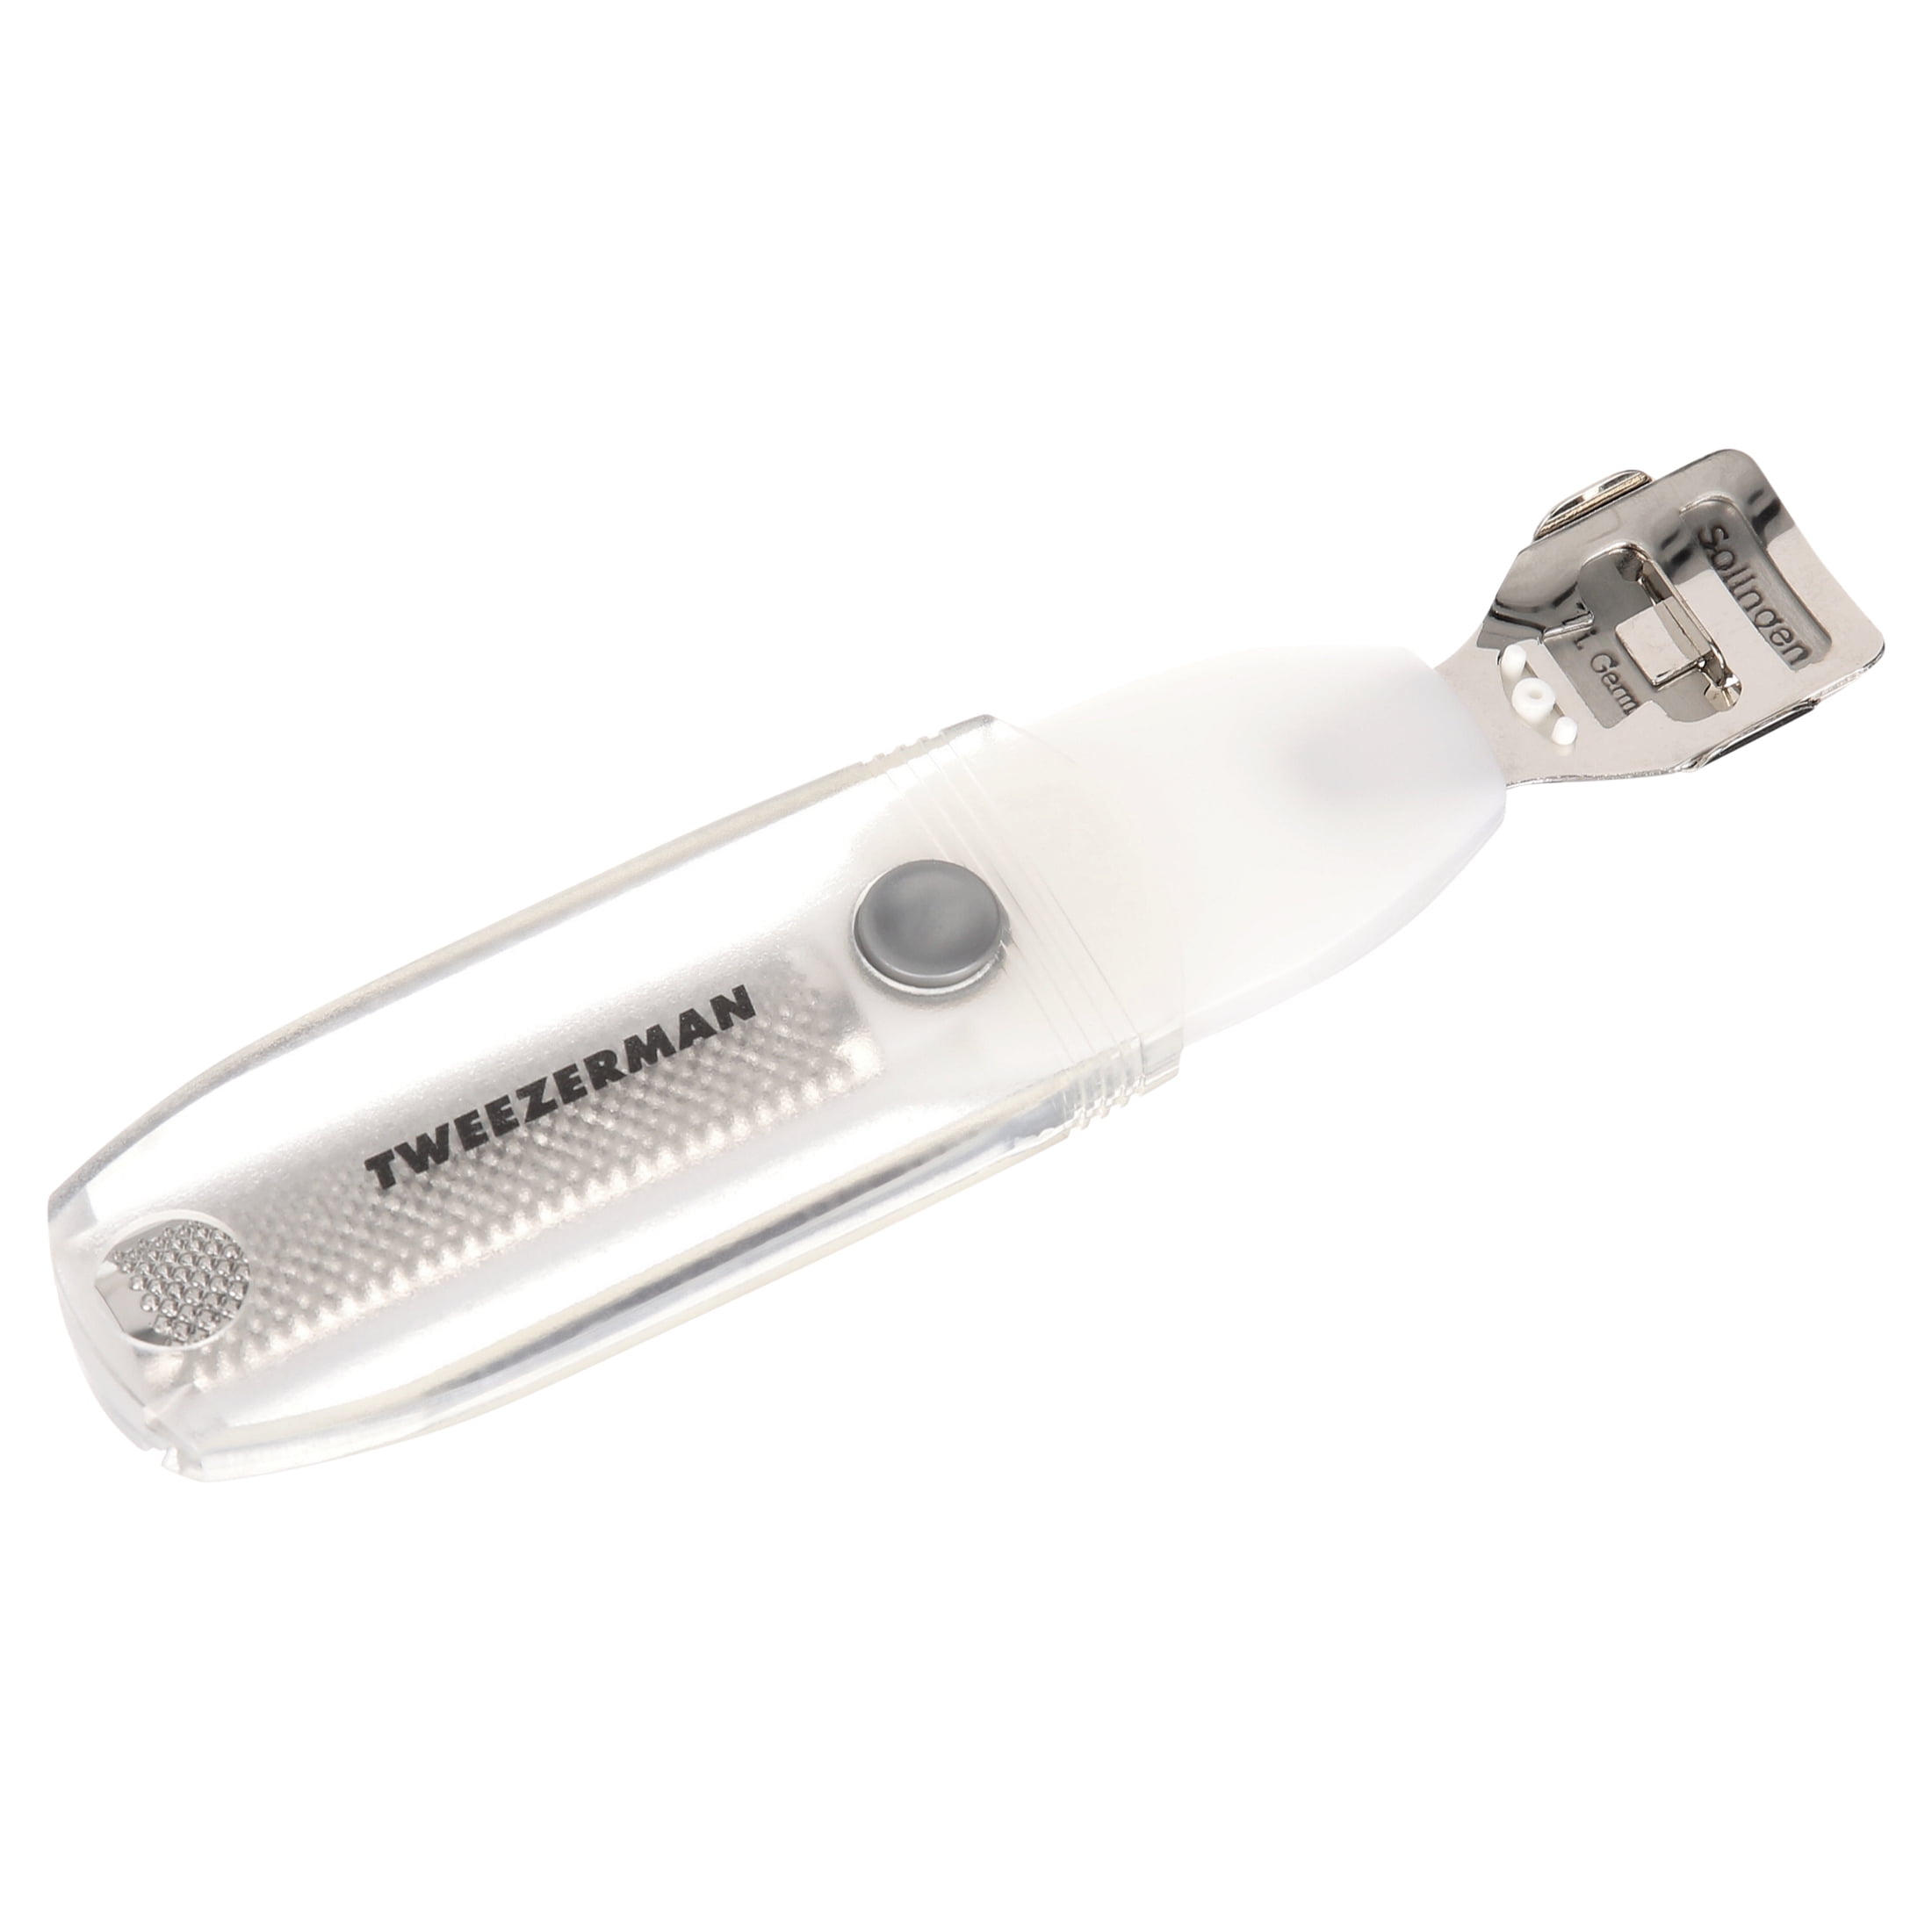 How To Use Tweezerman's Callus Shaver for Super Smooth Feet